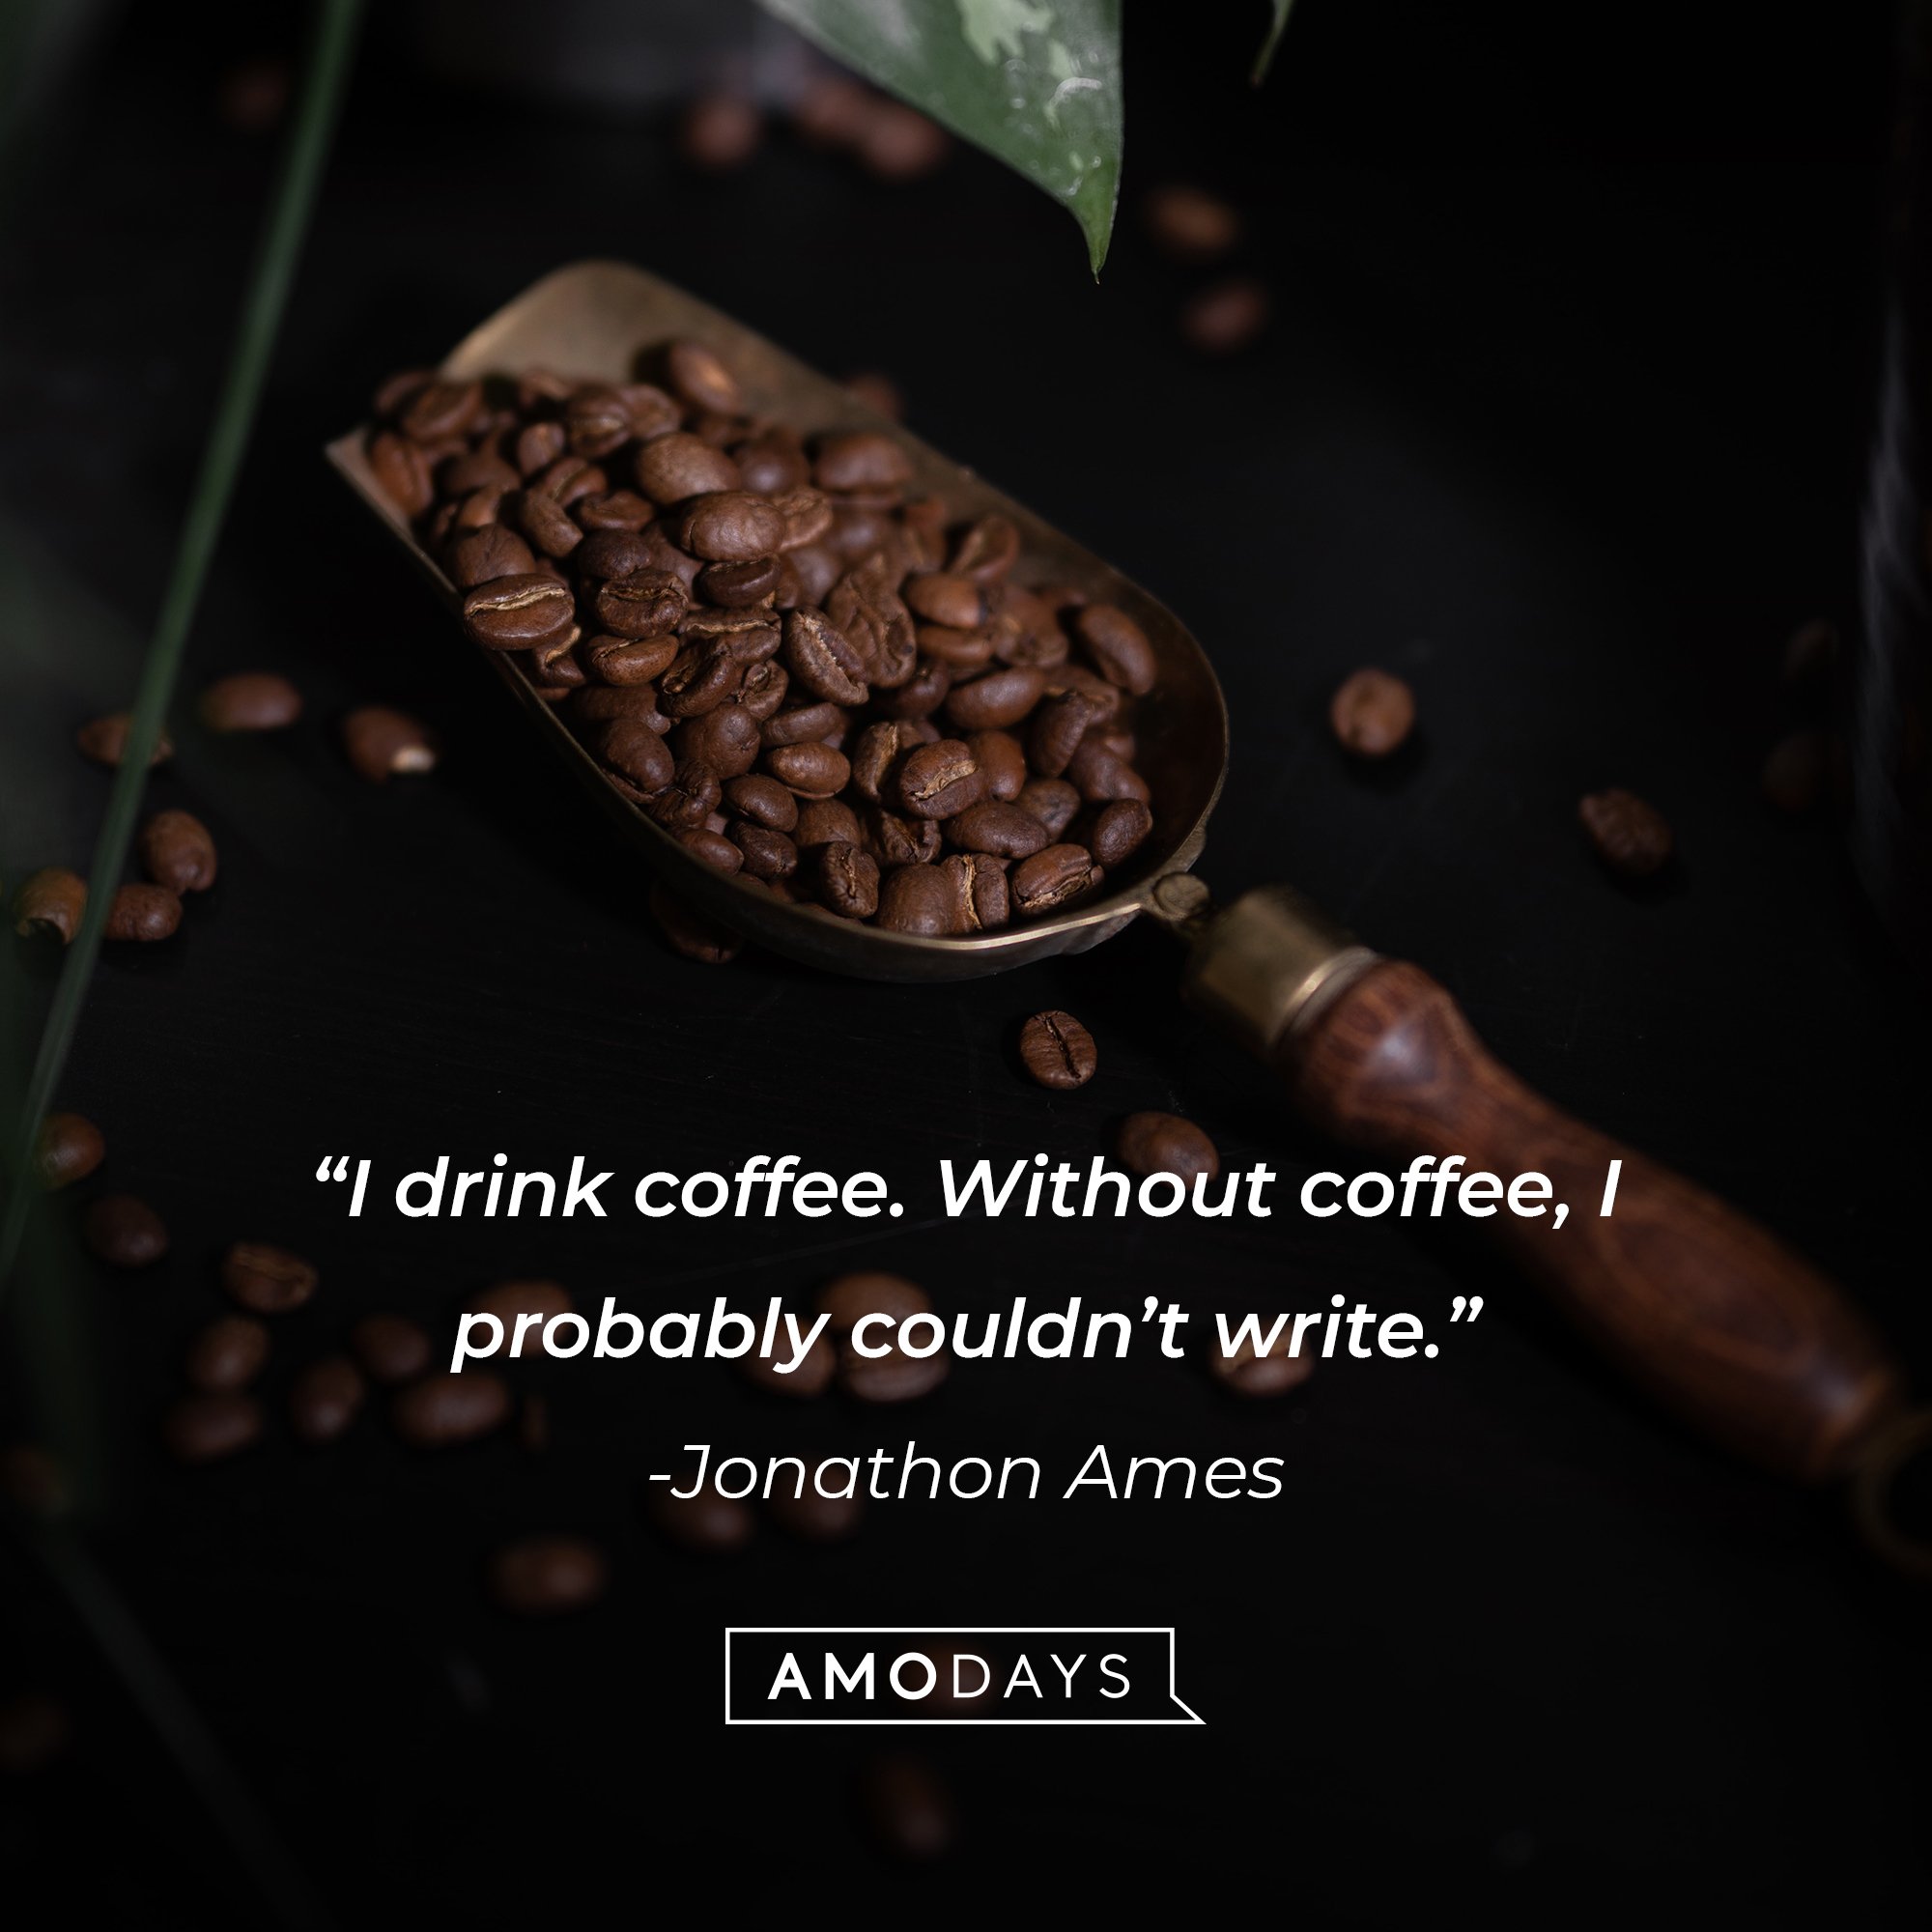 Jonathon Ames' quote: "I drink coffee. Without coffee, I probably couldn’t write." | Image: AmoDays